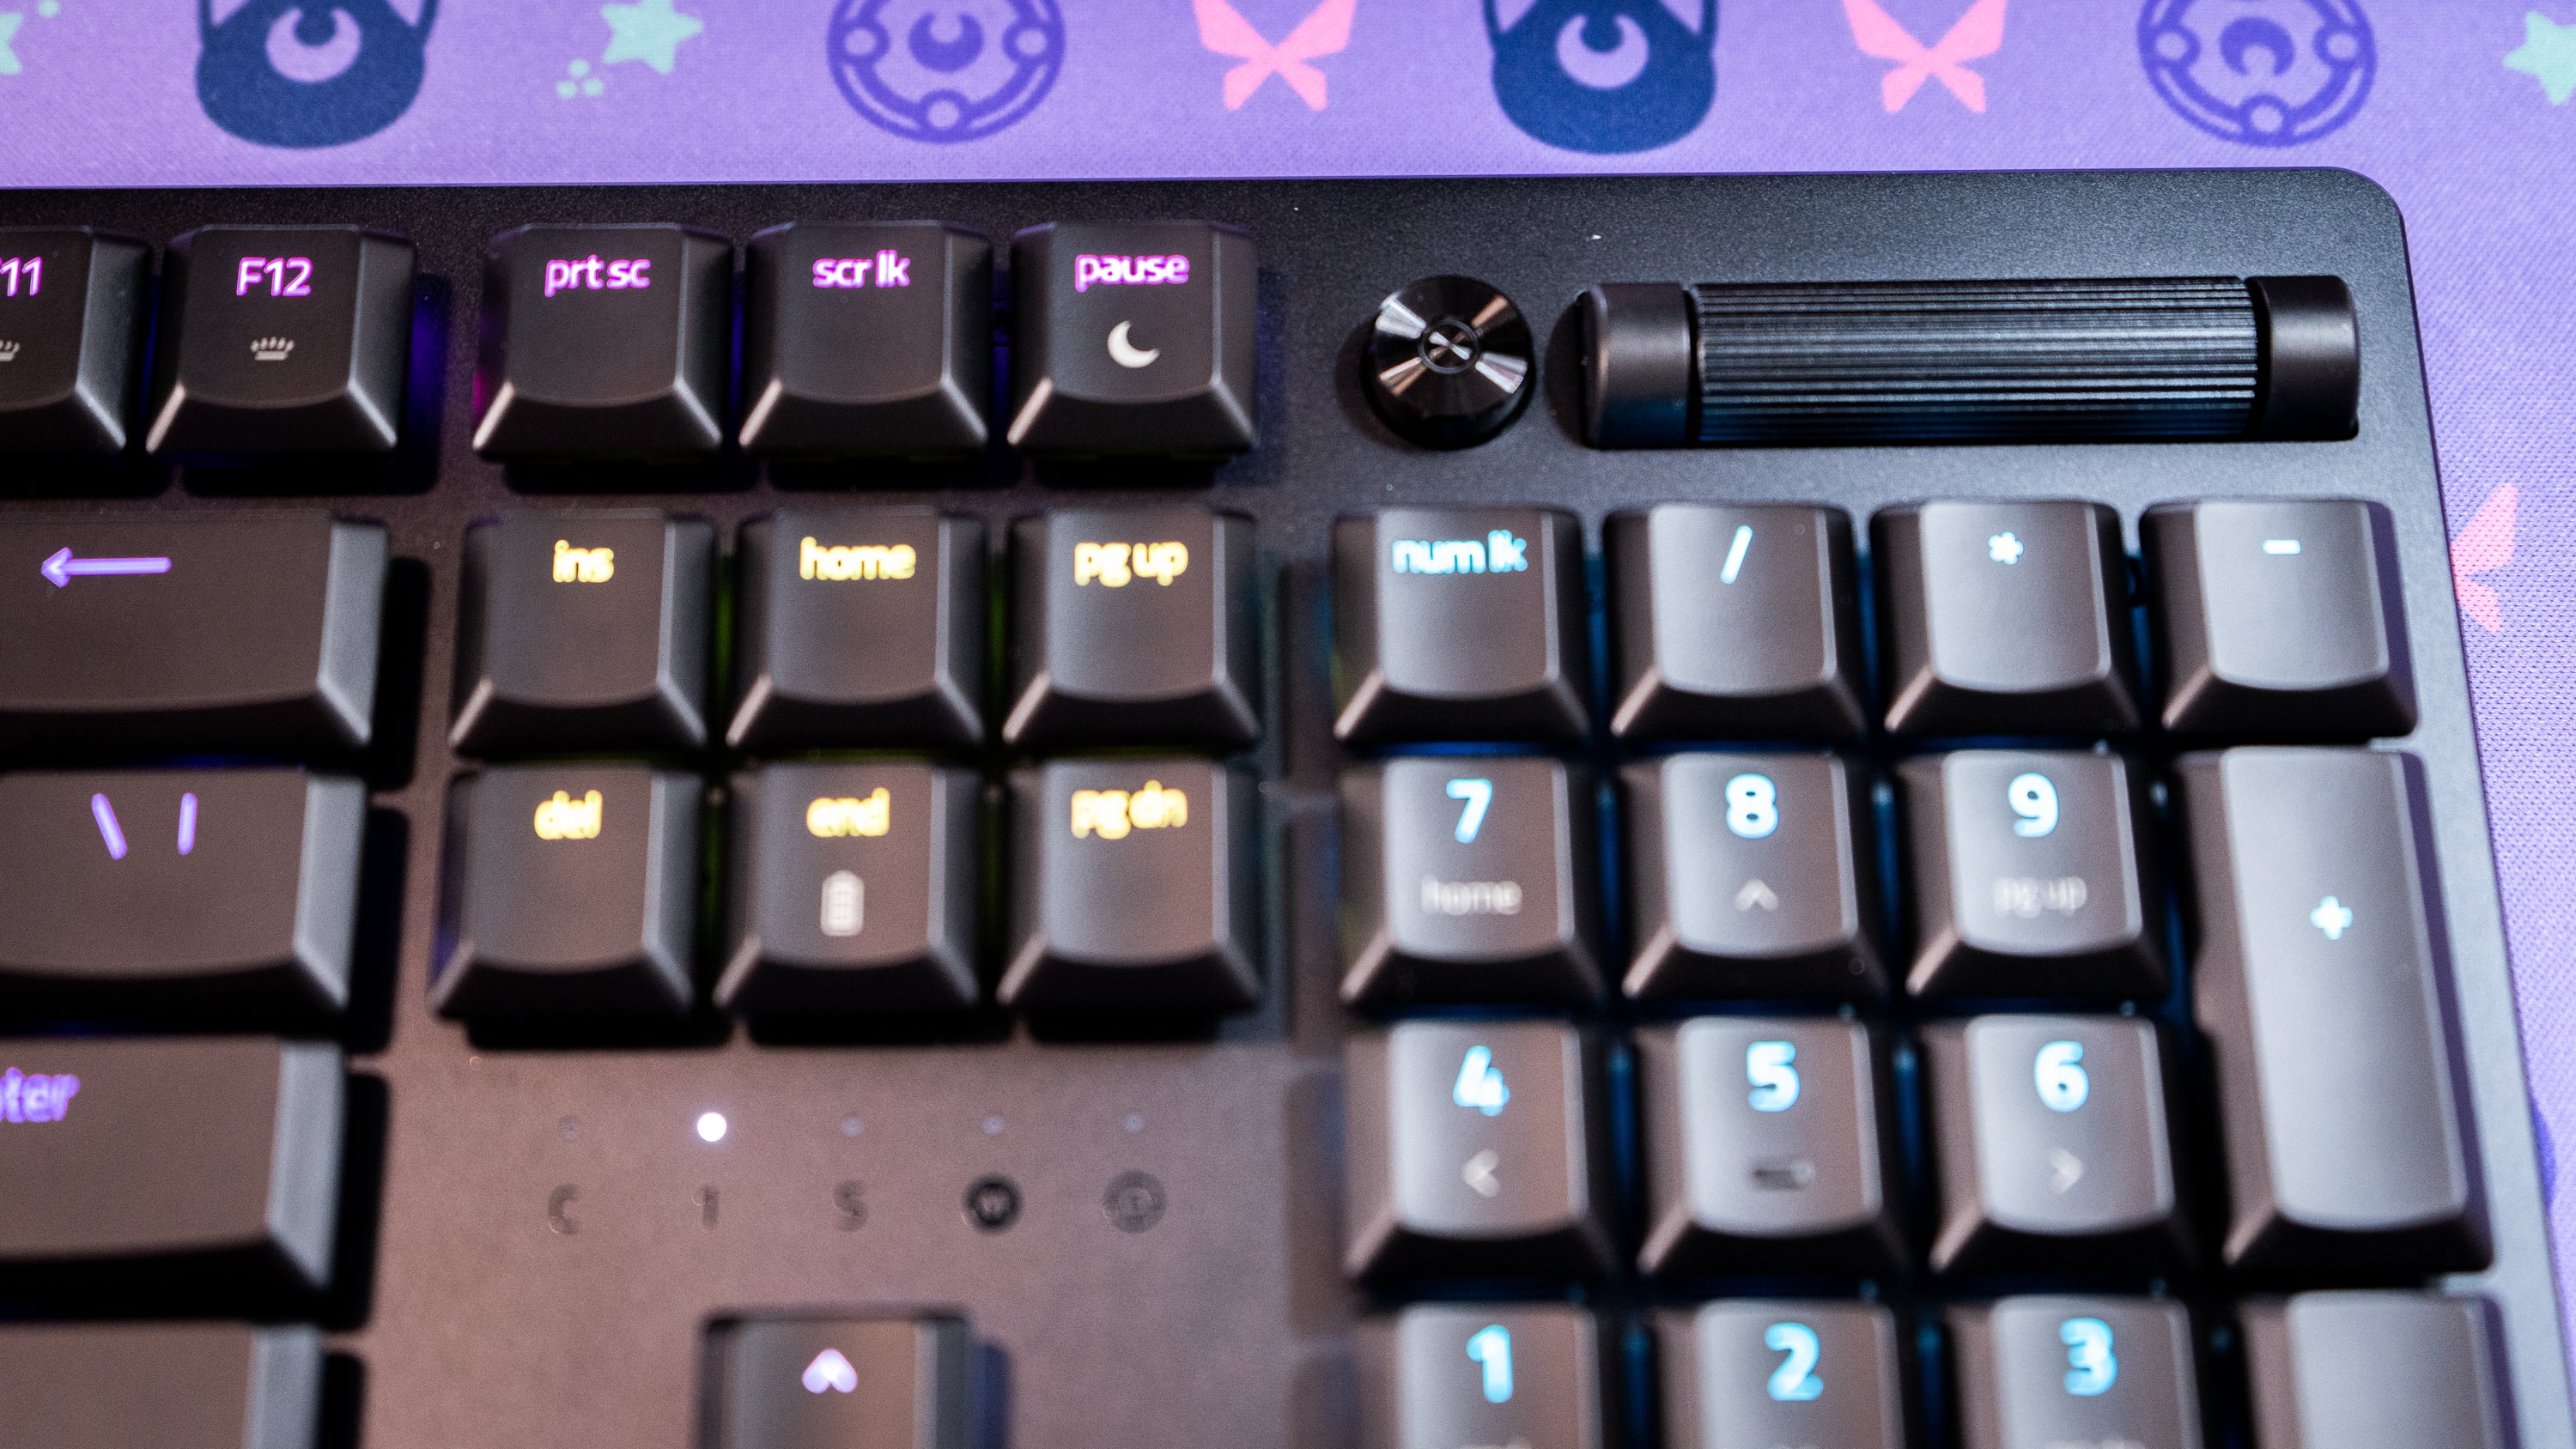 The DeathStalker V2 Pro's simple volume knob matches the low-profile aesthetic.  (Photo: Florence Ion / Gizmodo)